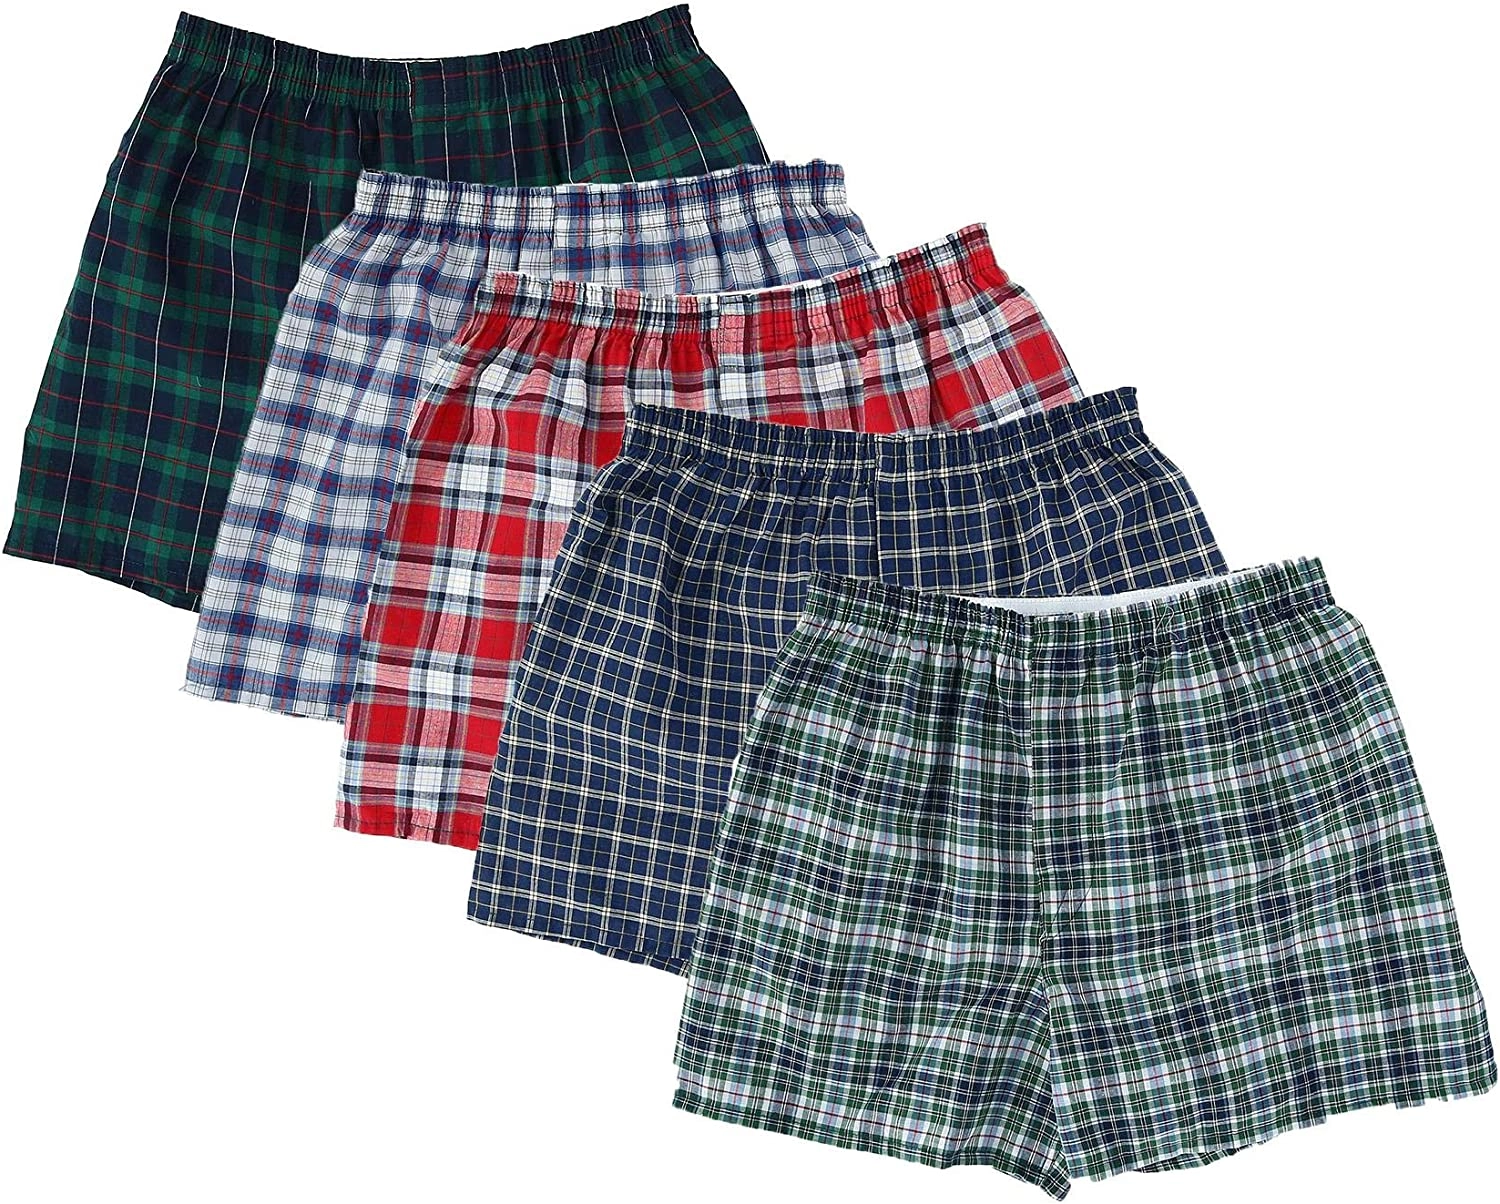 Mens Boxer Shorts From Bangladesh Underwear Exporters